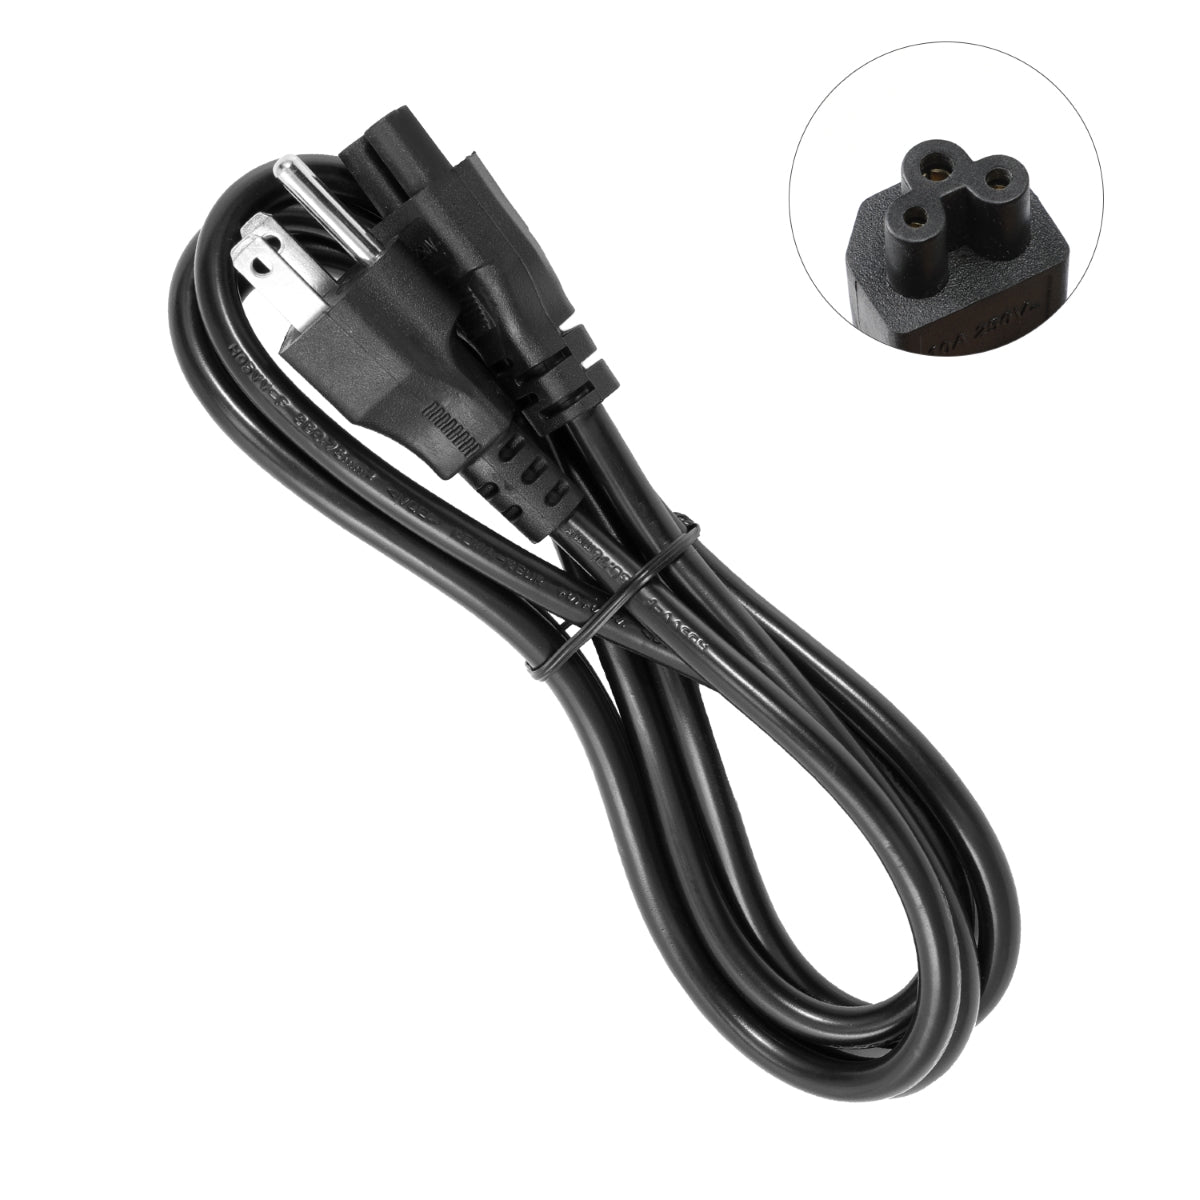 Power Cord for LG 65LB6190 Monitor.